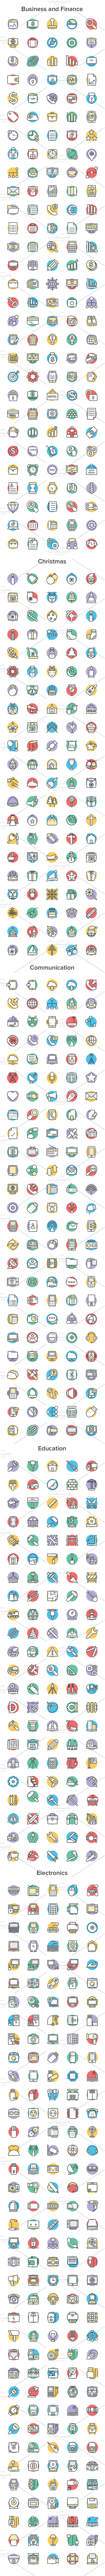 2900+ Cool Vector Icon Sets Bundle in Communication Icons - product preview 1